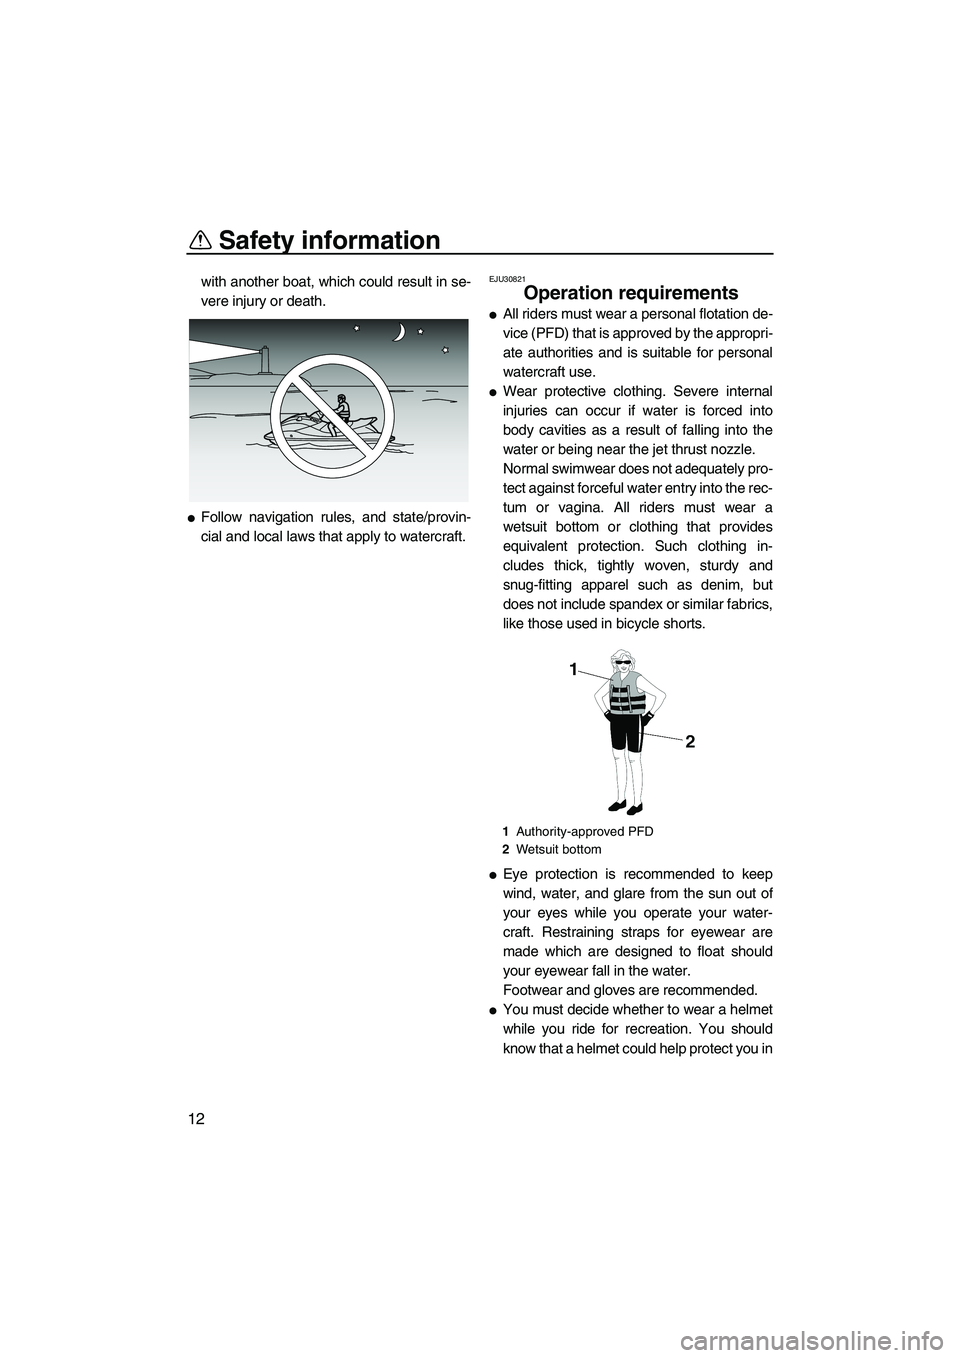 YAMAHA SVHO 2011 User Guide Safety information
12
with another boat, which could result in se-
vere injury or death.
Follow navigation rules, and state/provin-
cial and local laws that apply to watercraft.
EJU30821
Operation re